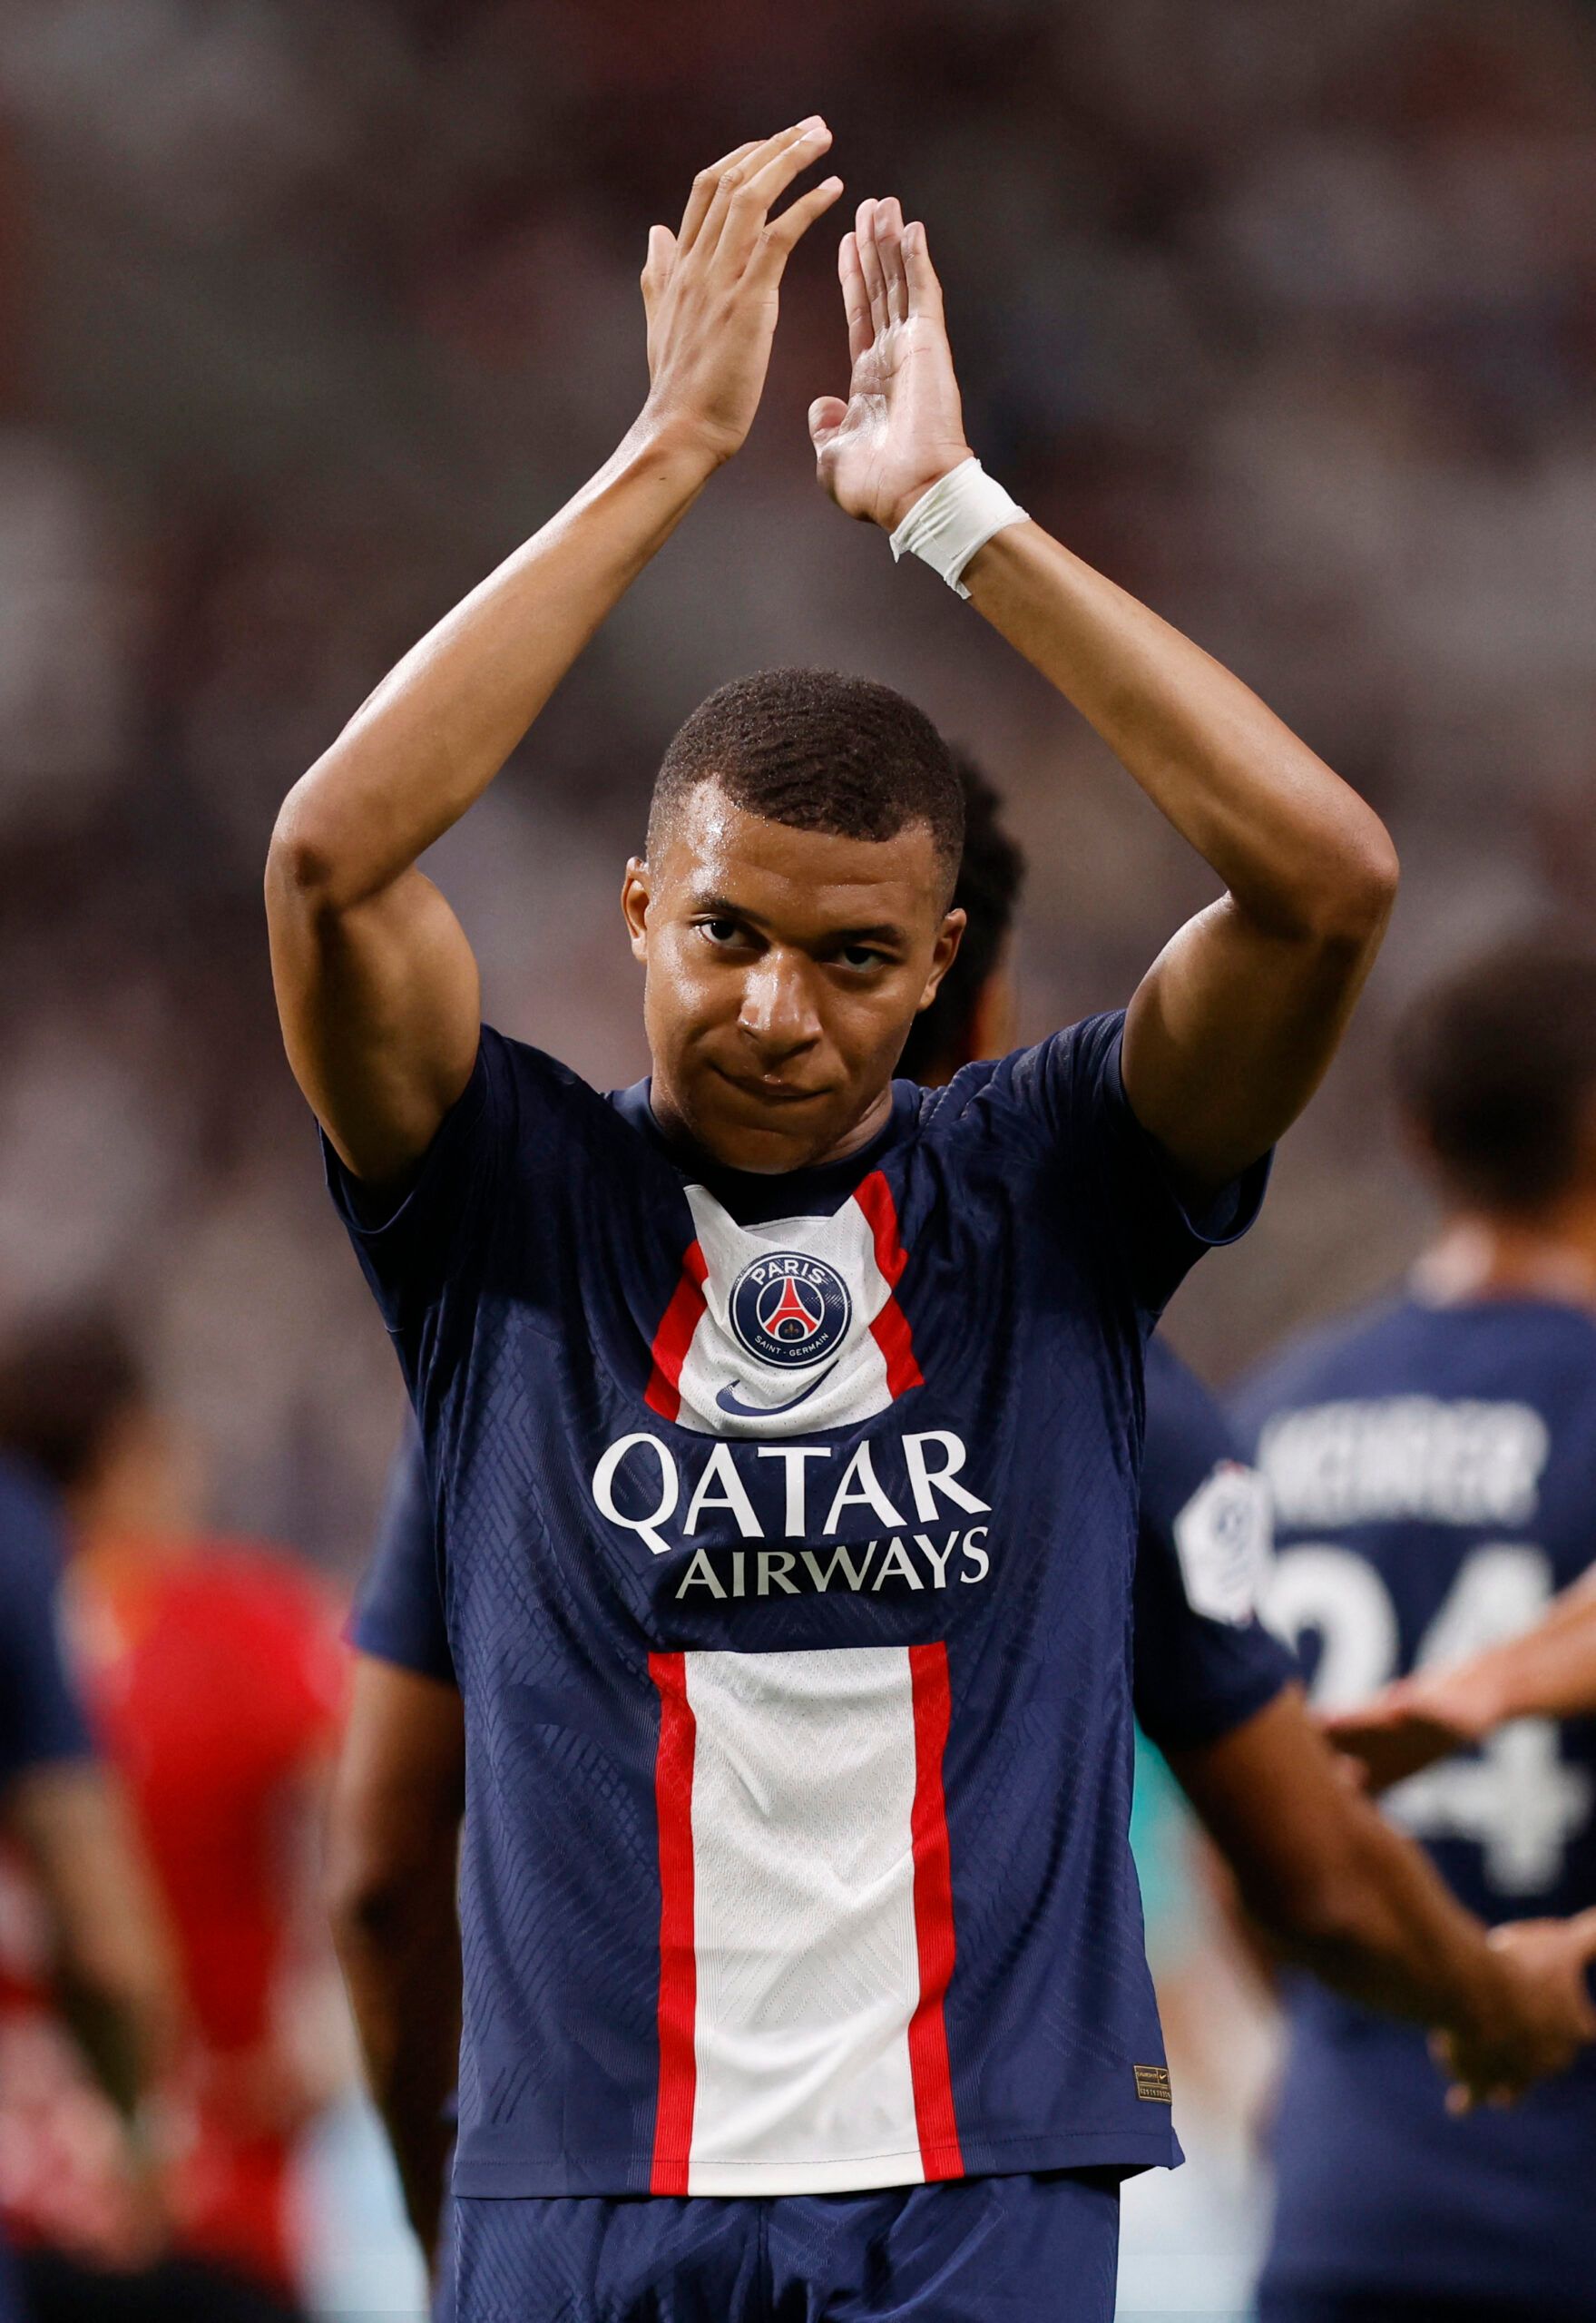 PSG's Mbappe clapping the fans.